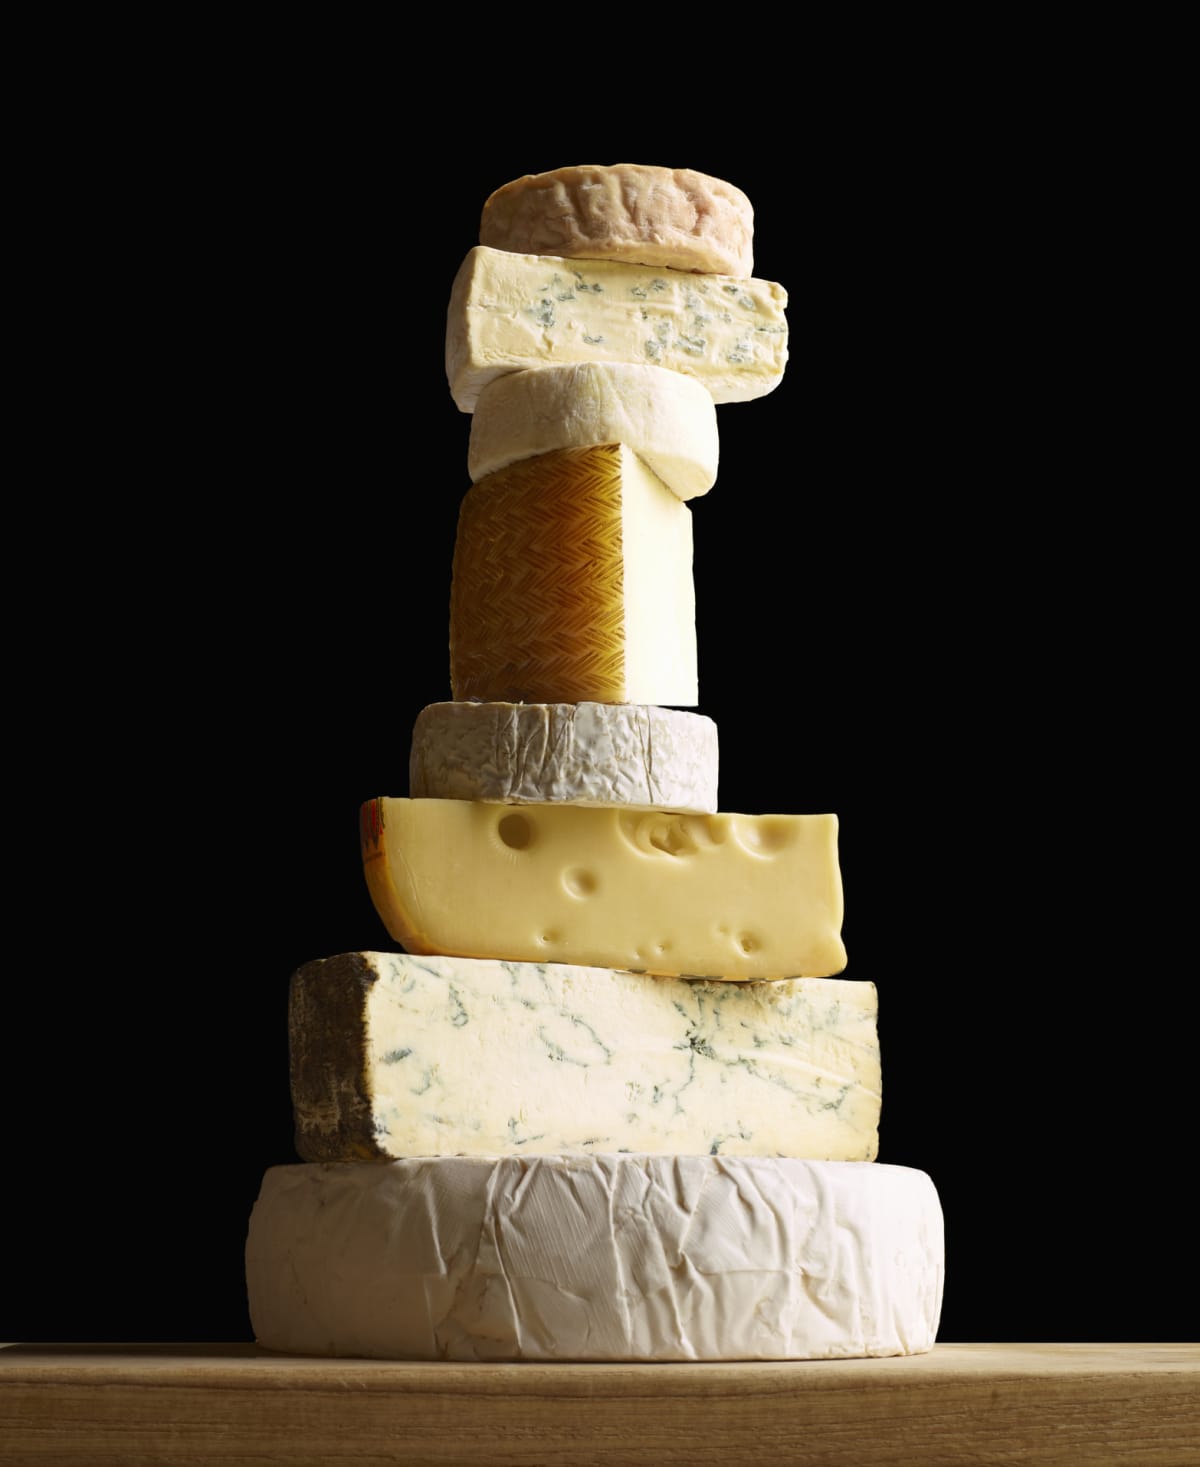 Cheeses stacked into a tower